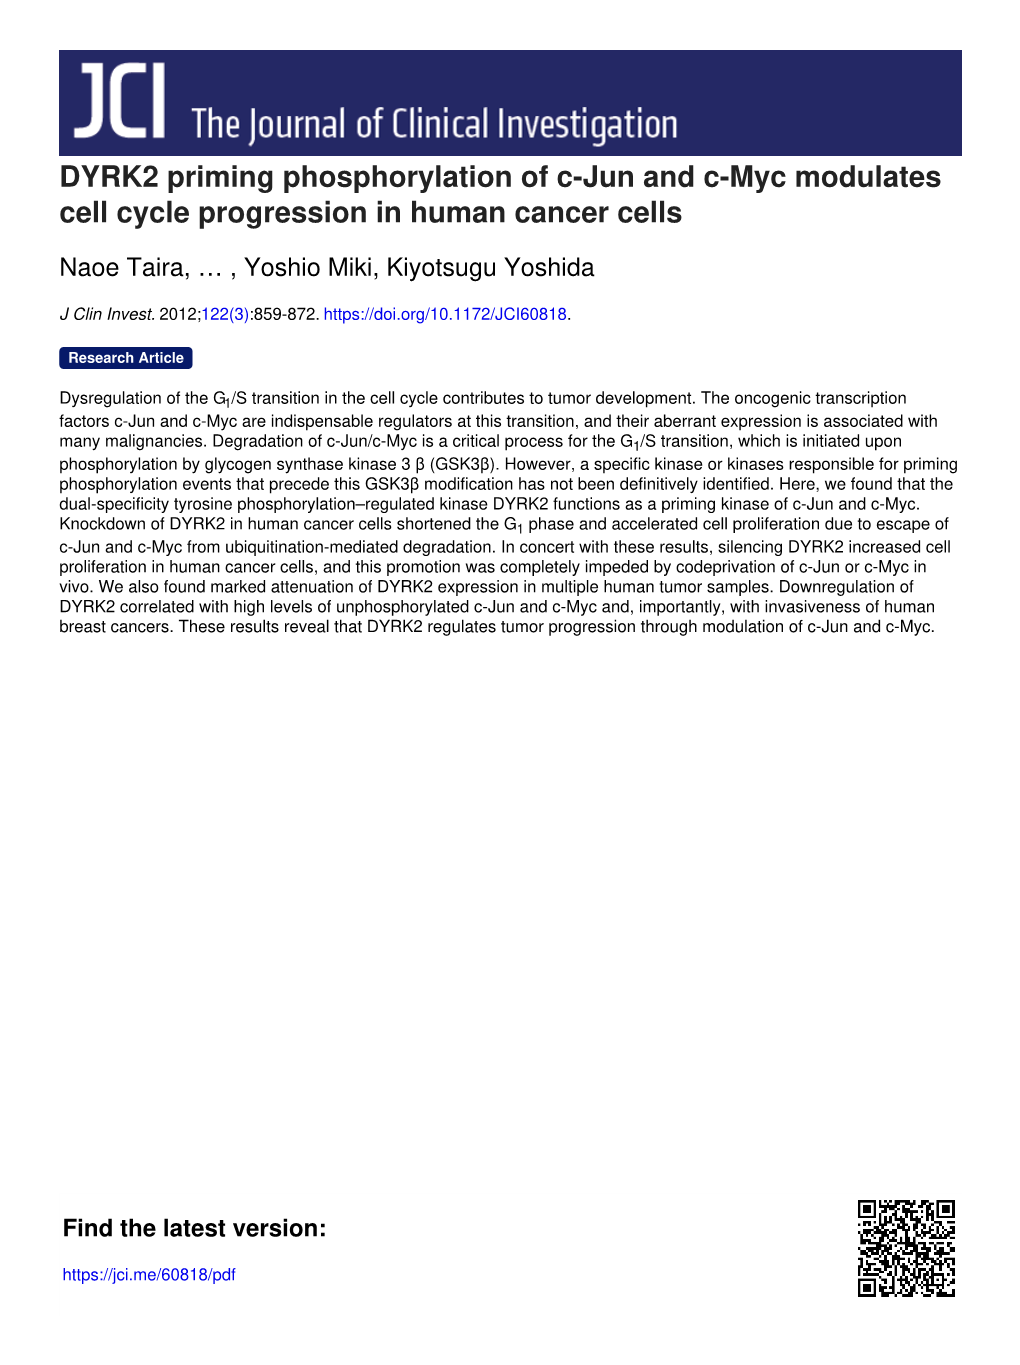 DYRK2 Priming Phosphorylation of C-Jun and C-Myc Modulates Cell Cycle Progression in Human Cancer Cells